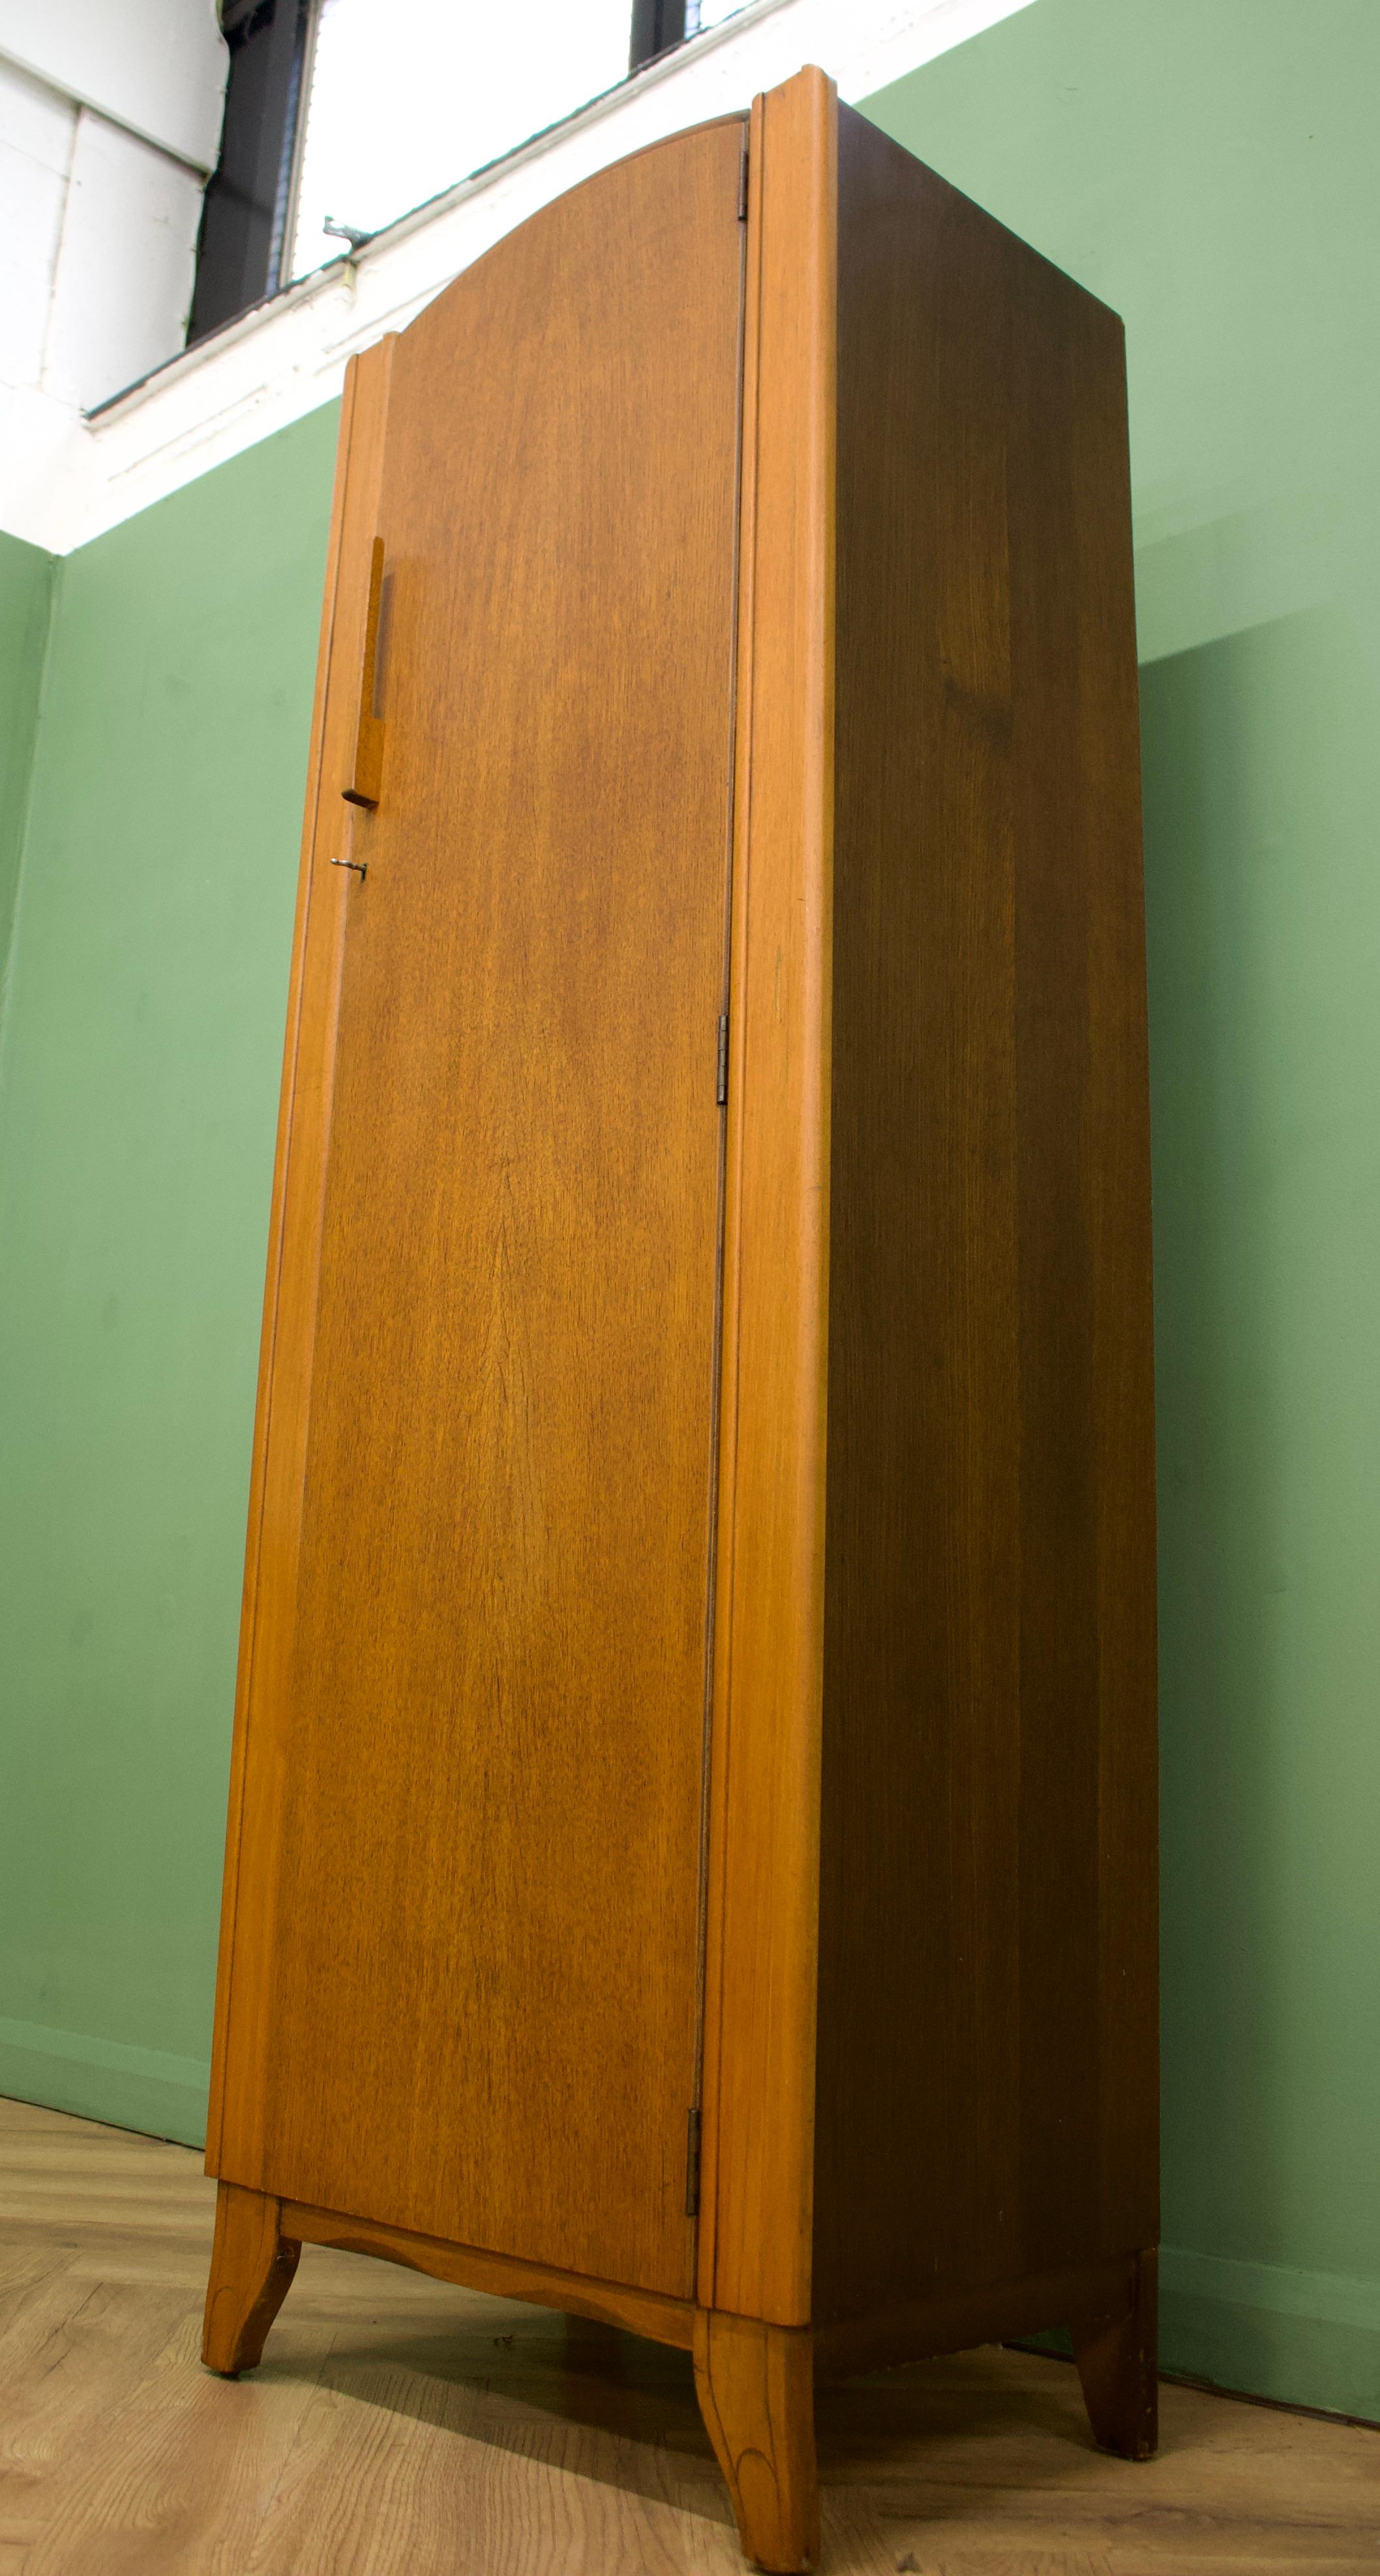 British Vintage Art Deco Style Oak Wardrobe from Lebus, 1950s For Sale 1